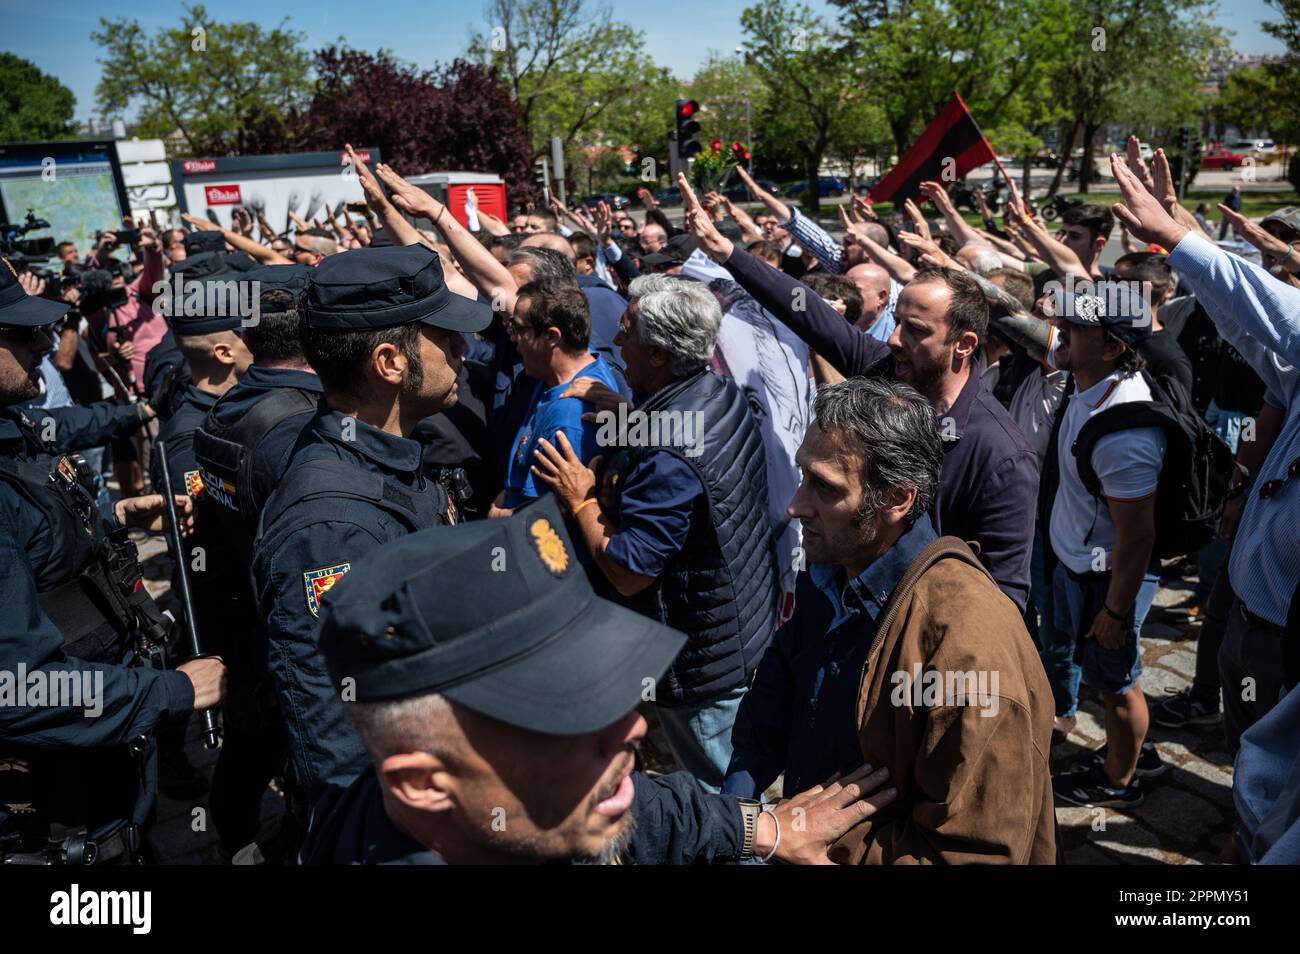 Madrid, Spain. 24th Apr, 2023. Police officers trying to block a group of members and supporters of La Falange party as they raise hands making a fascist salute during a protest outside the San Isidro Cemetery the day of the exhumation of the remains of the founder of Falange, Jose Antonio Primo de Rivera. The fascist politician's remains were exhumed from the Valle de los Caidos (known now as Valle de Cuelgamuros) and transferred to the San Isidro cemetery. Credit: Marcos del Mazo/Alamy Live News Stock Photo